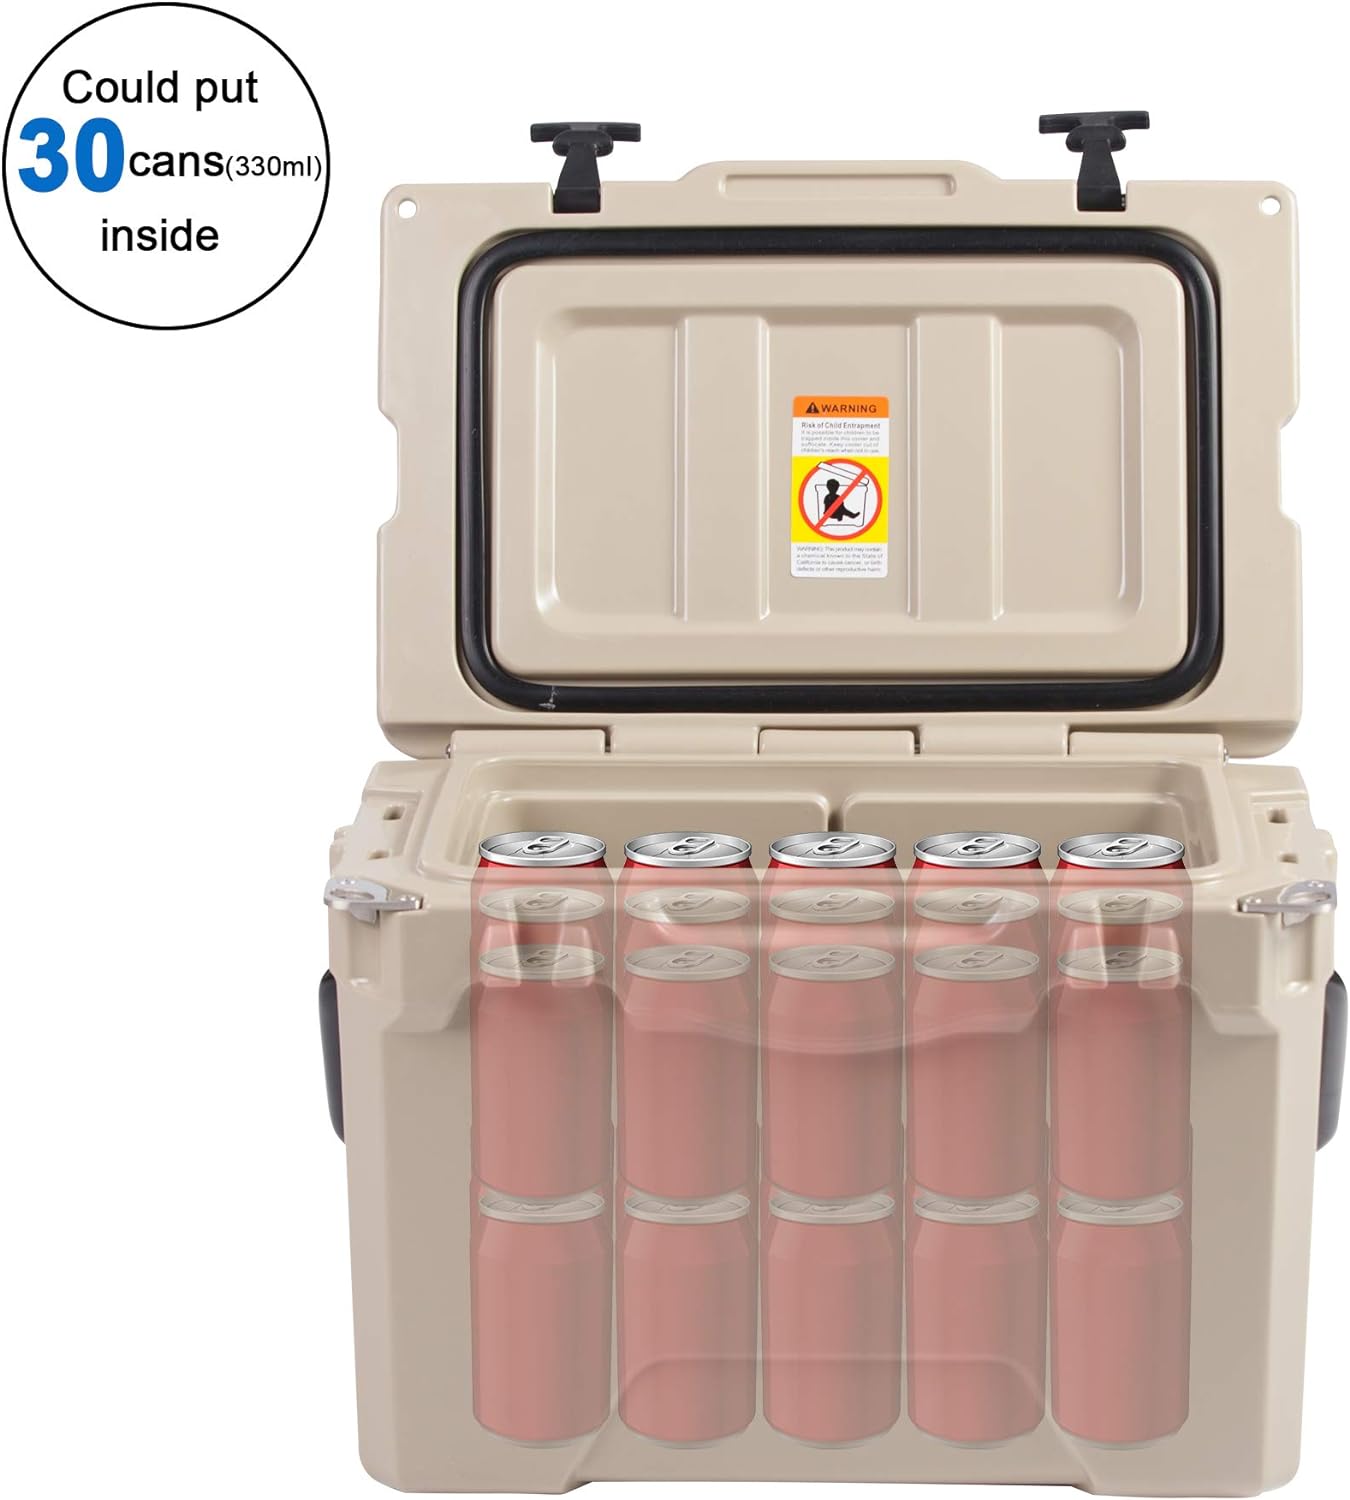 25QT Rotomolded Insulated Ice Cooler 3-5 Days Ice Chest with Built-in Fish Ruler, Bottle Opener, Cup Holder